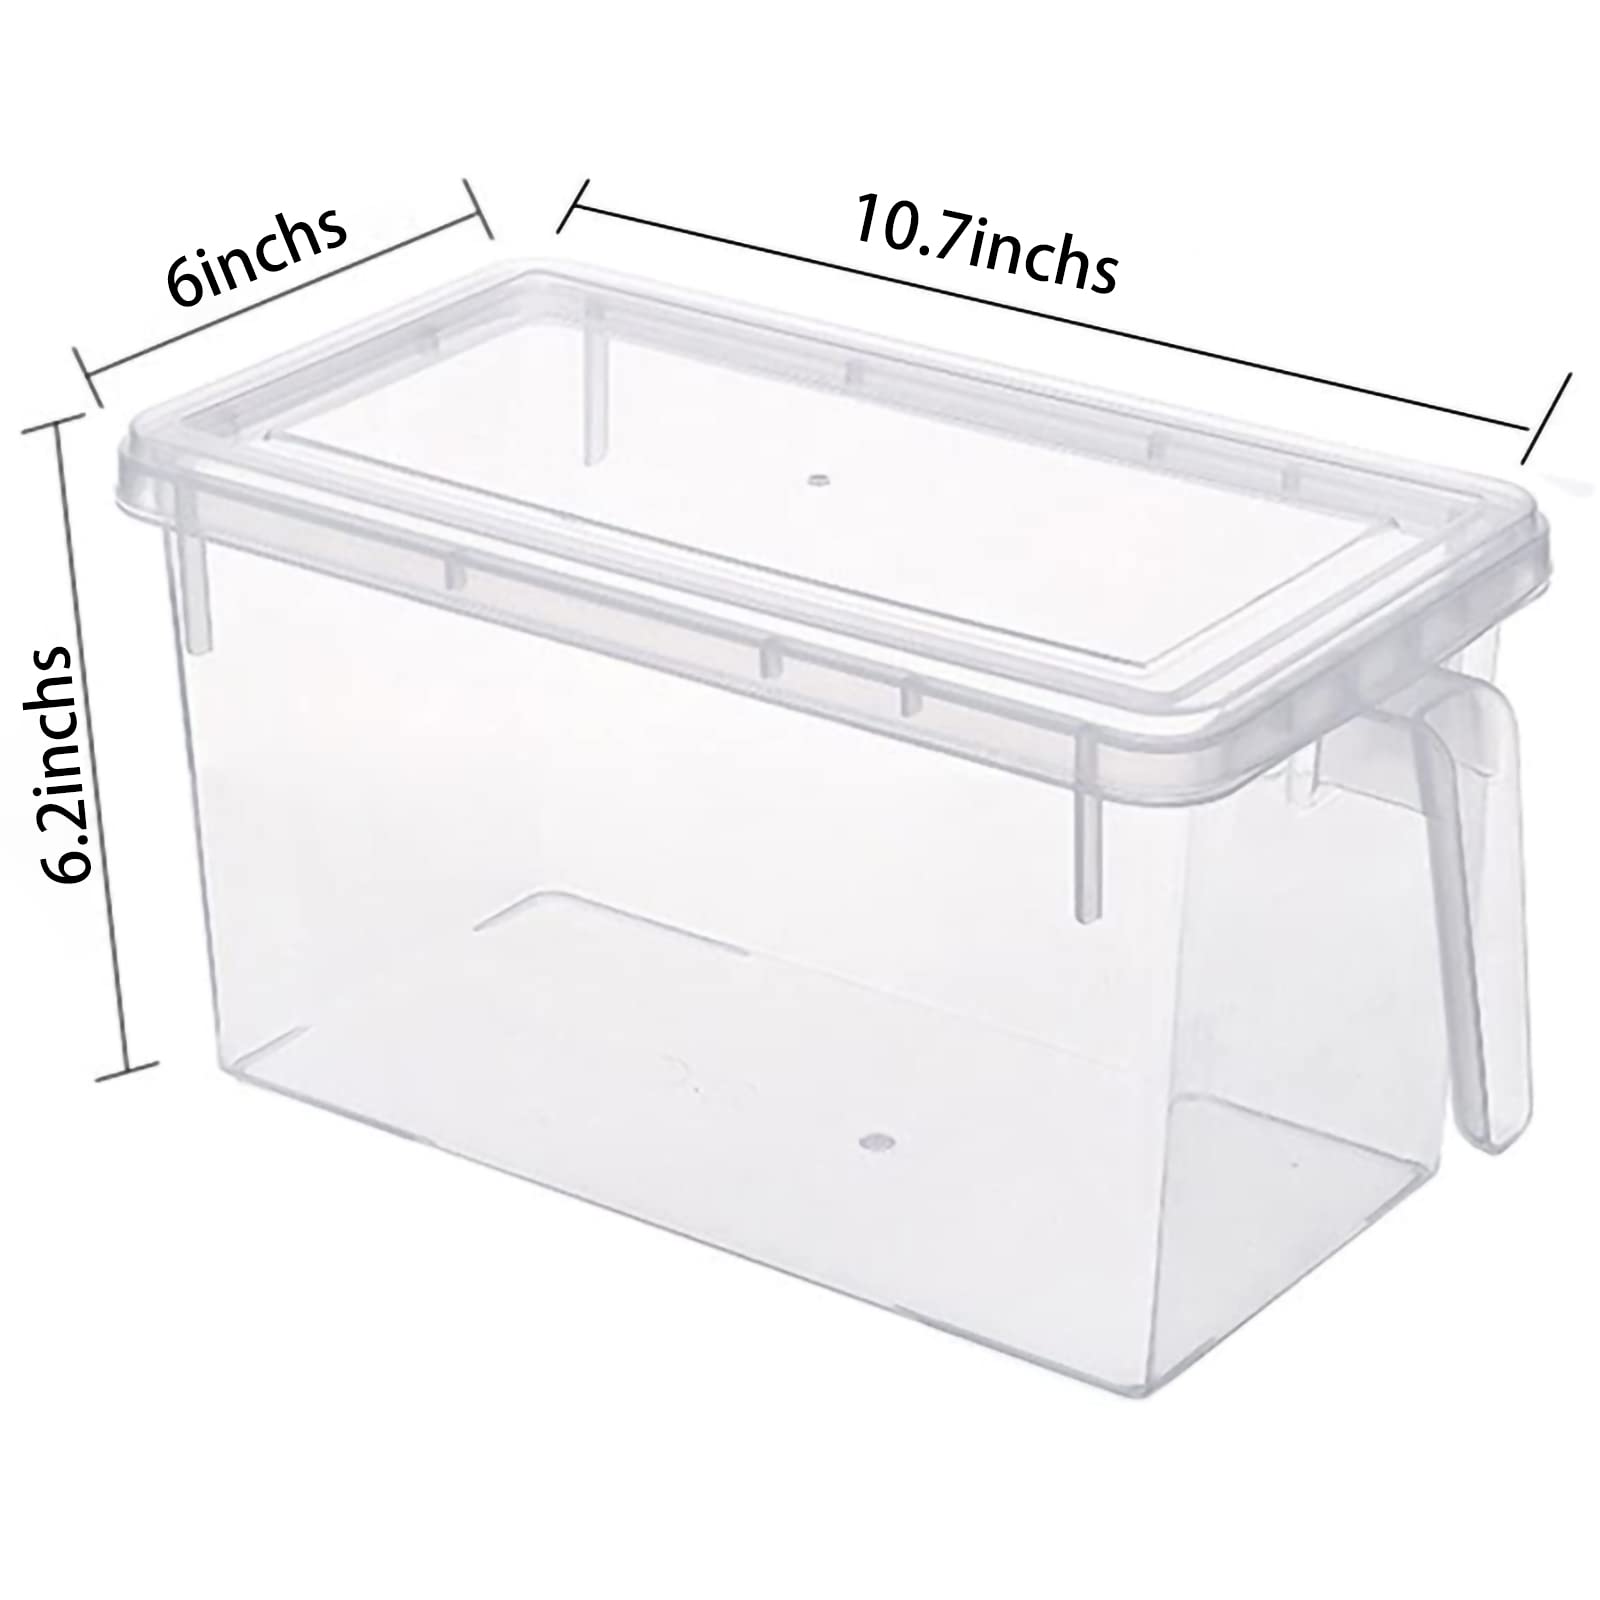 Eanpet Large Fridge Organizer Food Storage Containers Stackable Refrigerator Organizer Bins with Lids Clear Plastic Organizer Square Produce Saver for Fruits,Vegetable,Meat(Set of 4 Pack)